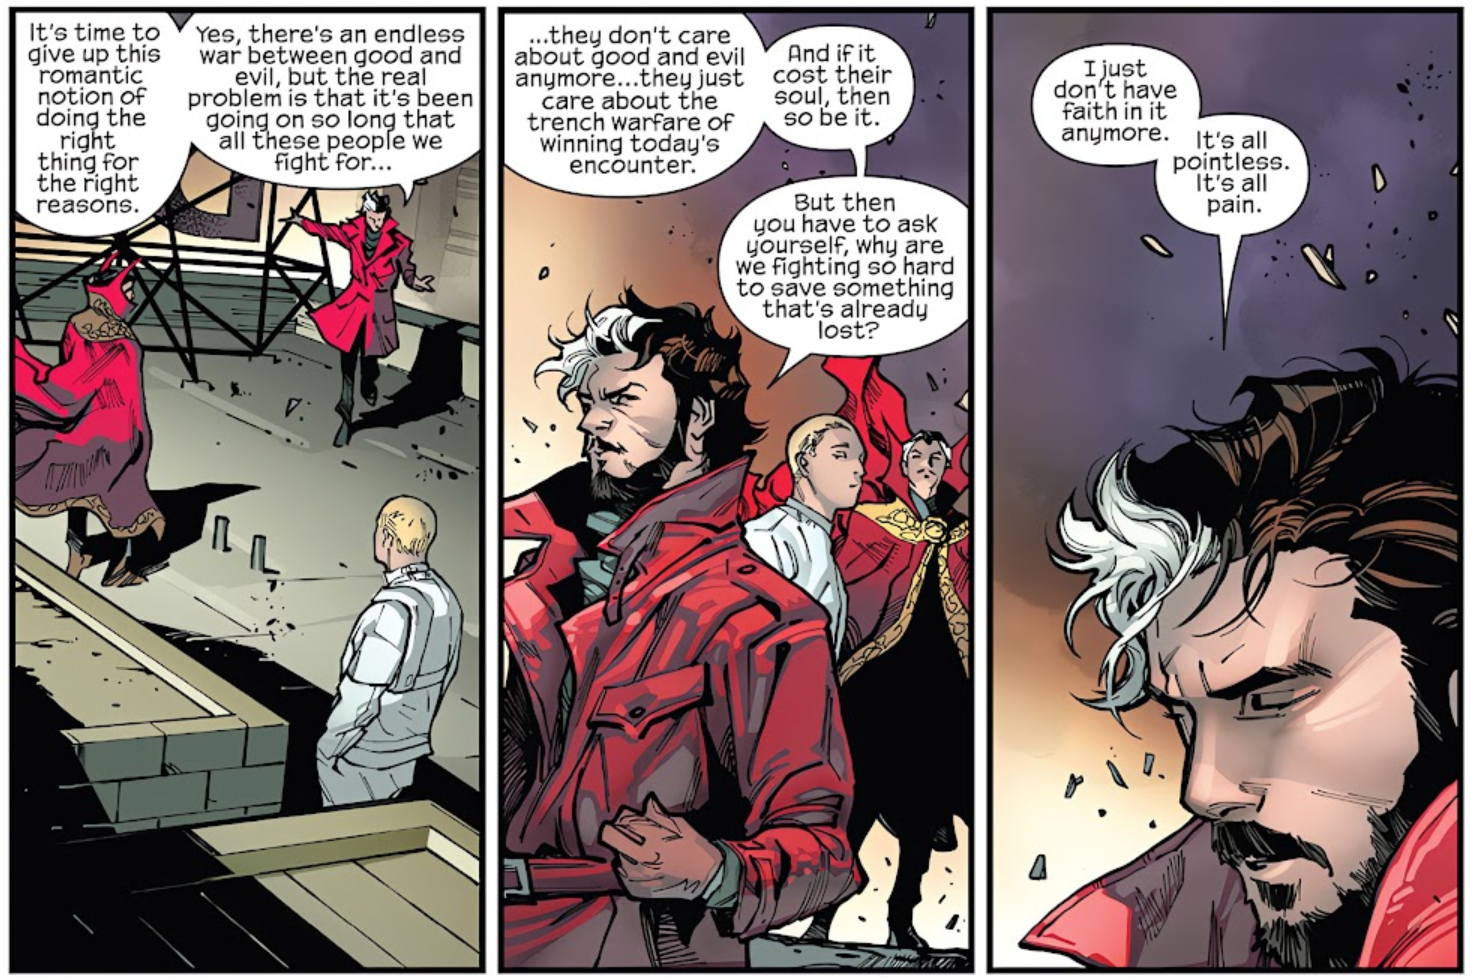 Wyn is pessimistic about good vs evil in G.O.D.S #1